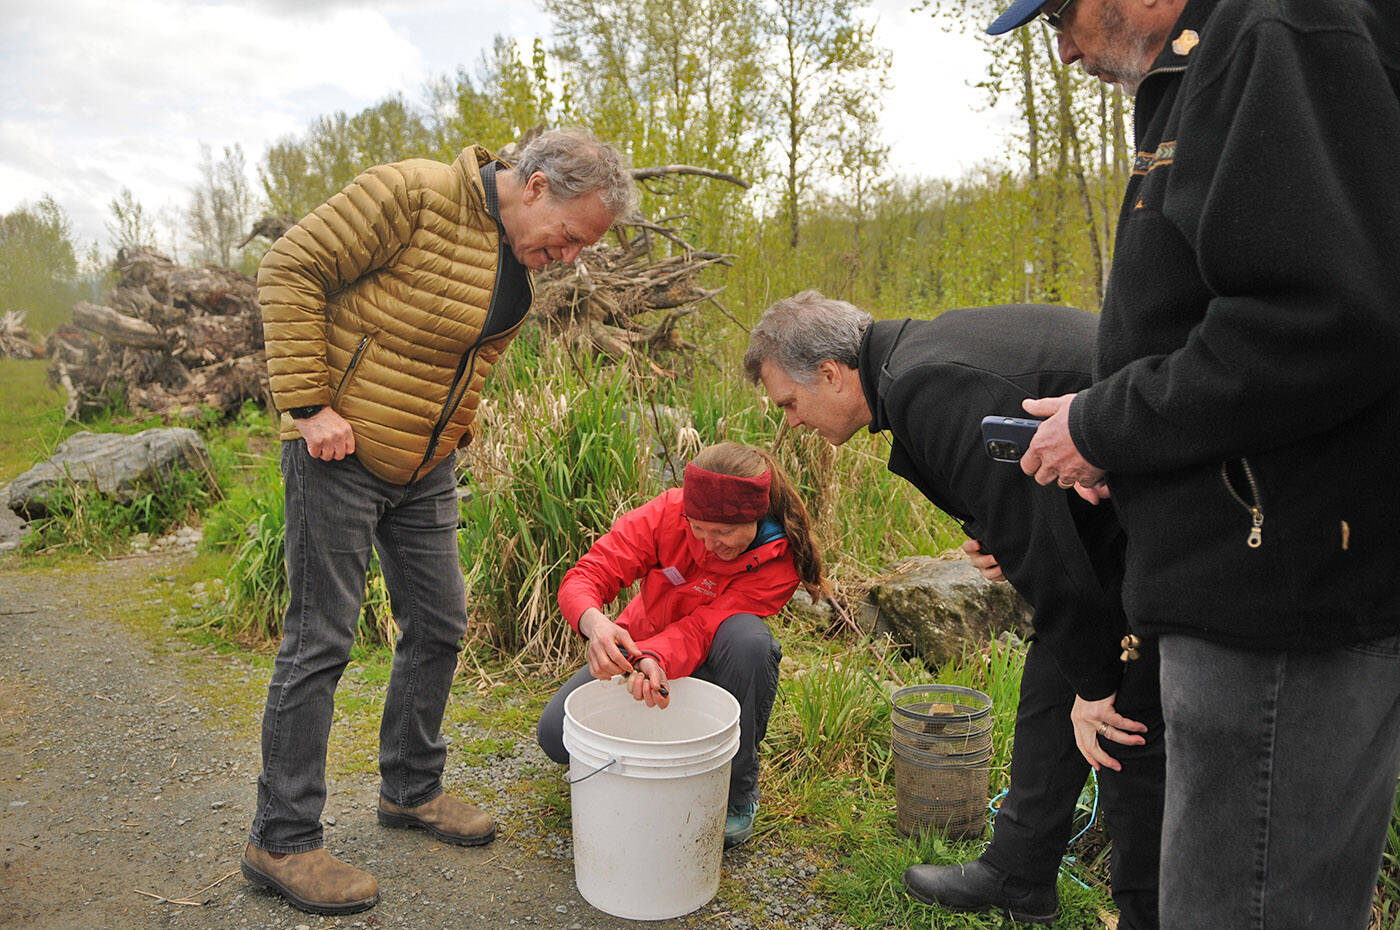 Minister of Environment and Climate Change Strategy, George Heyman (gold coat) and Fin Donnelly, parliamentary secretary for Fisheries and Aquaculture, look as Winter Moon holds a Salish sucker that was caught and then released at Hooge Wetlands in Chilliwack on Thursday, April 21, 2022. (Jenna Hauck/ Chilliwack Progress)